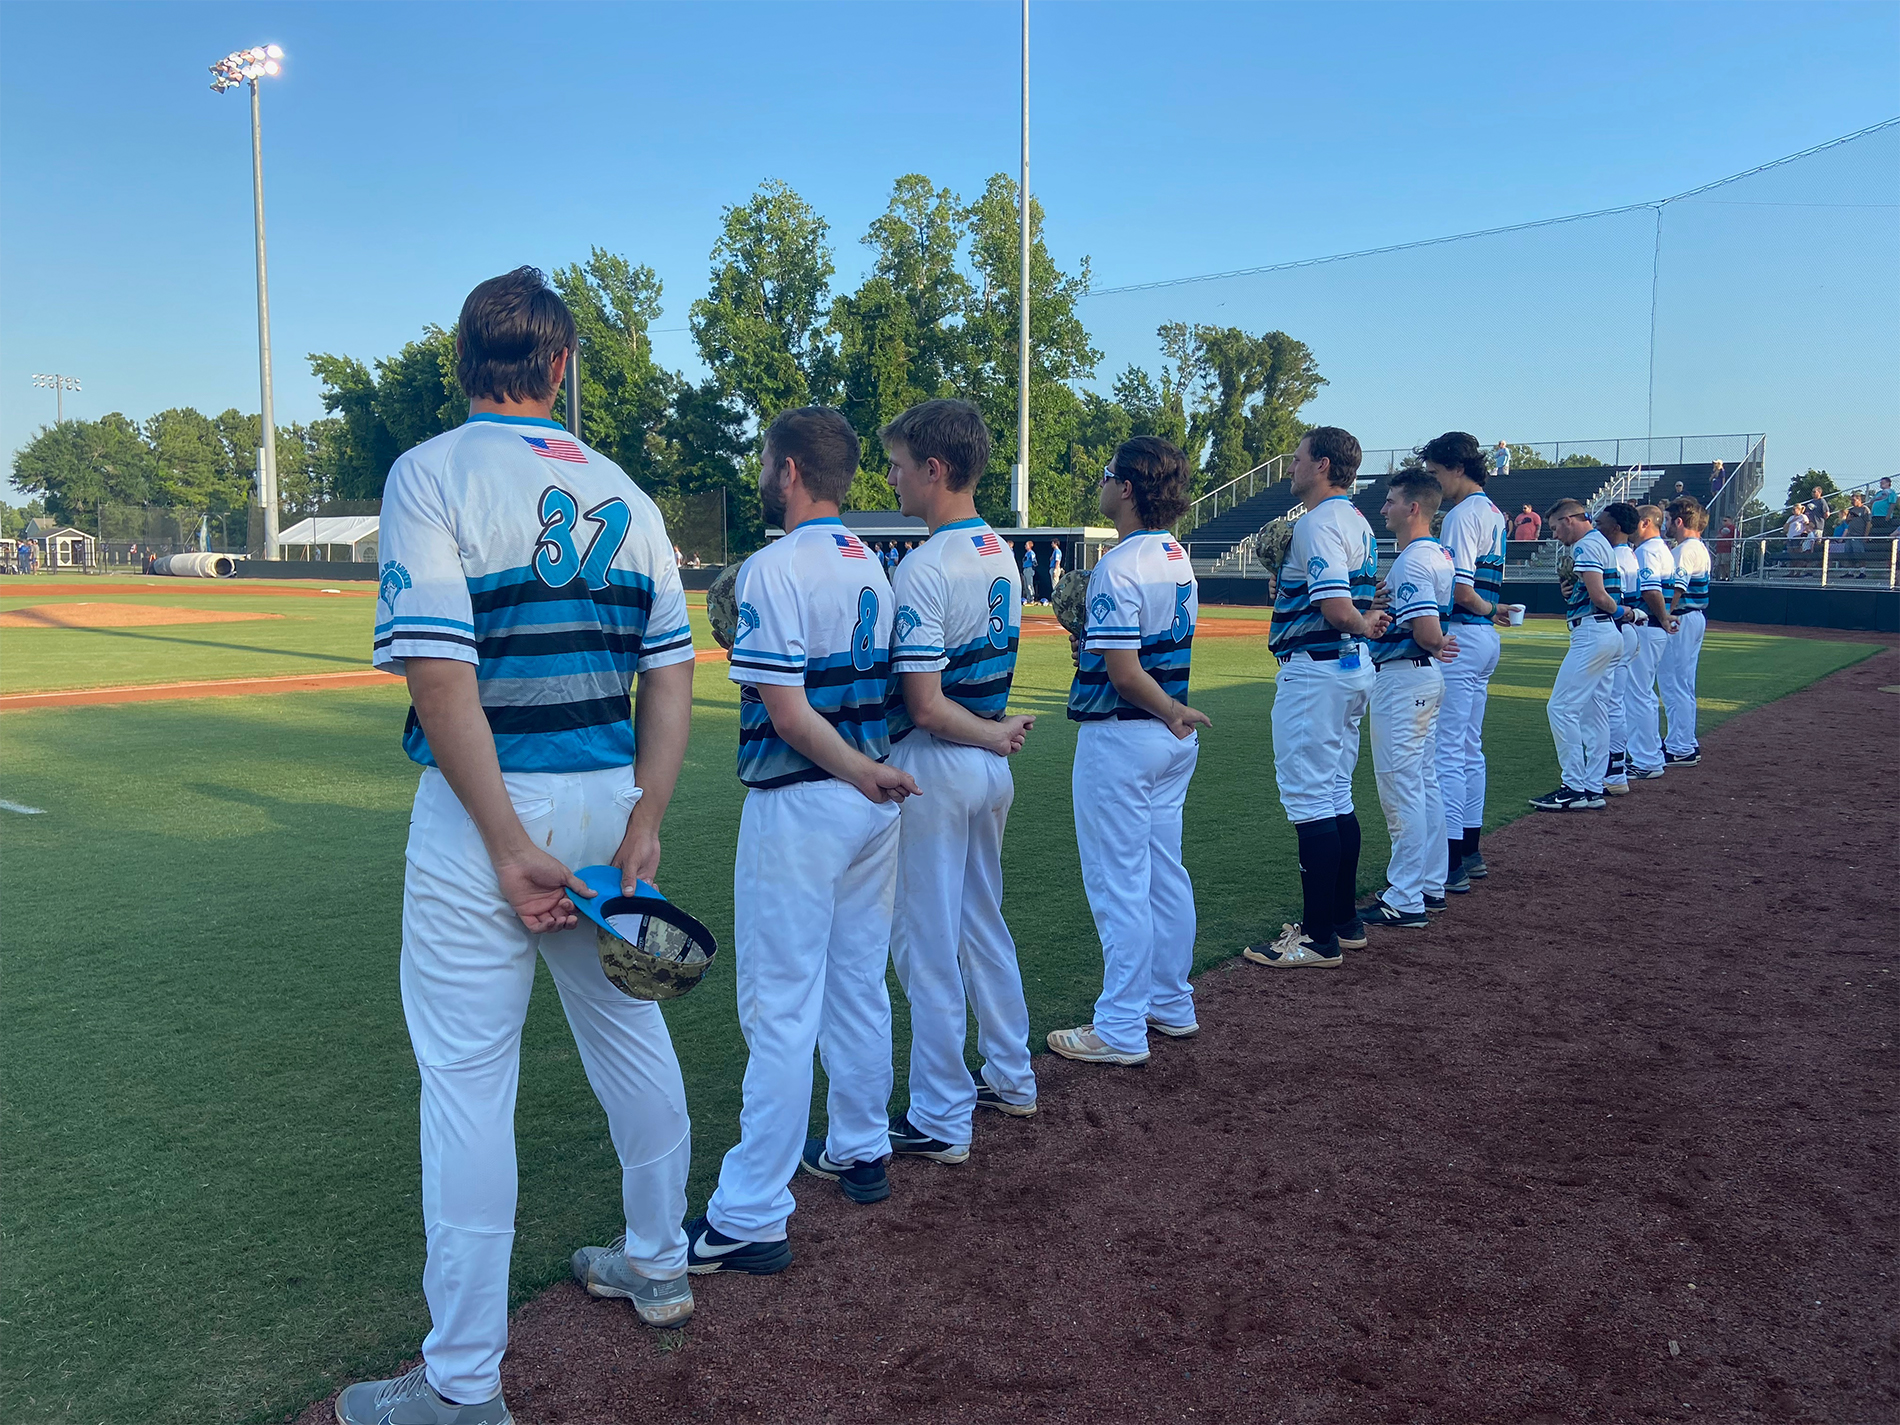 Marlins out-hit Salamanders to wild 14-10 win on Monday night at The Rock